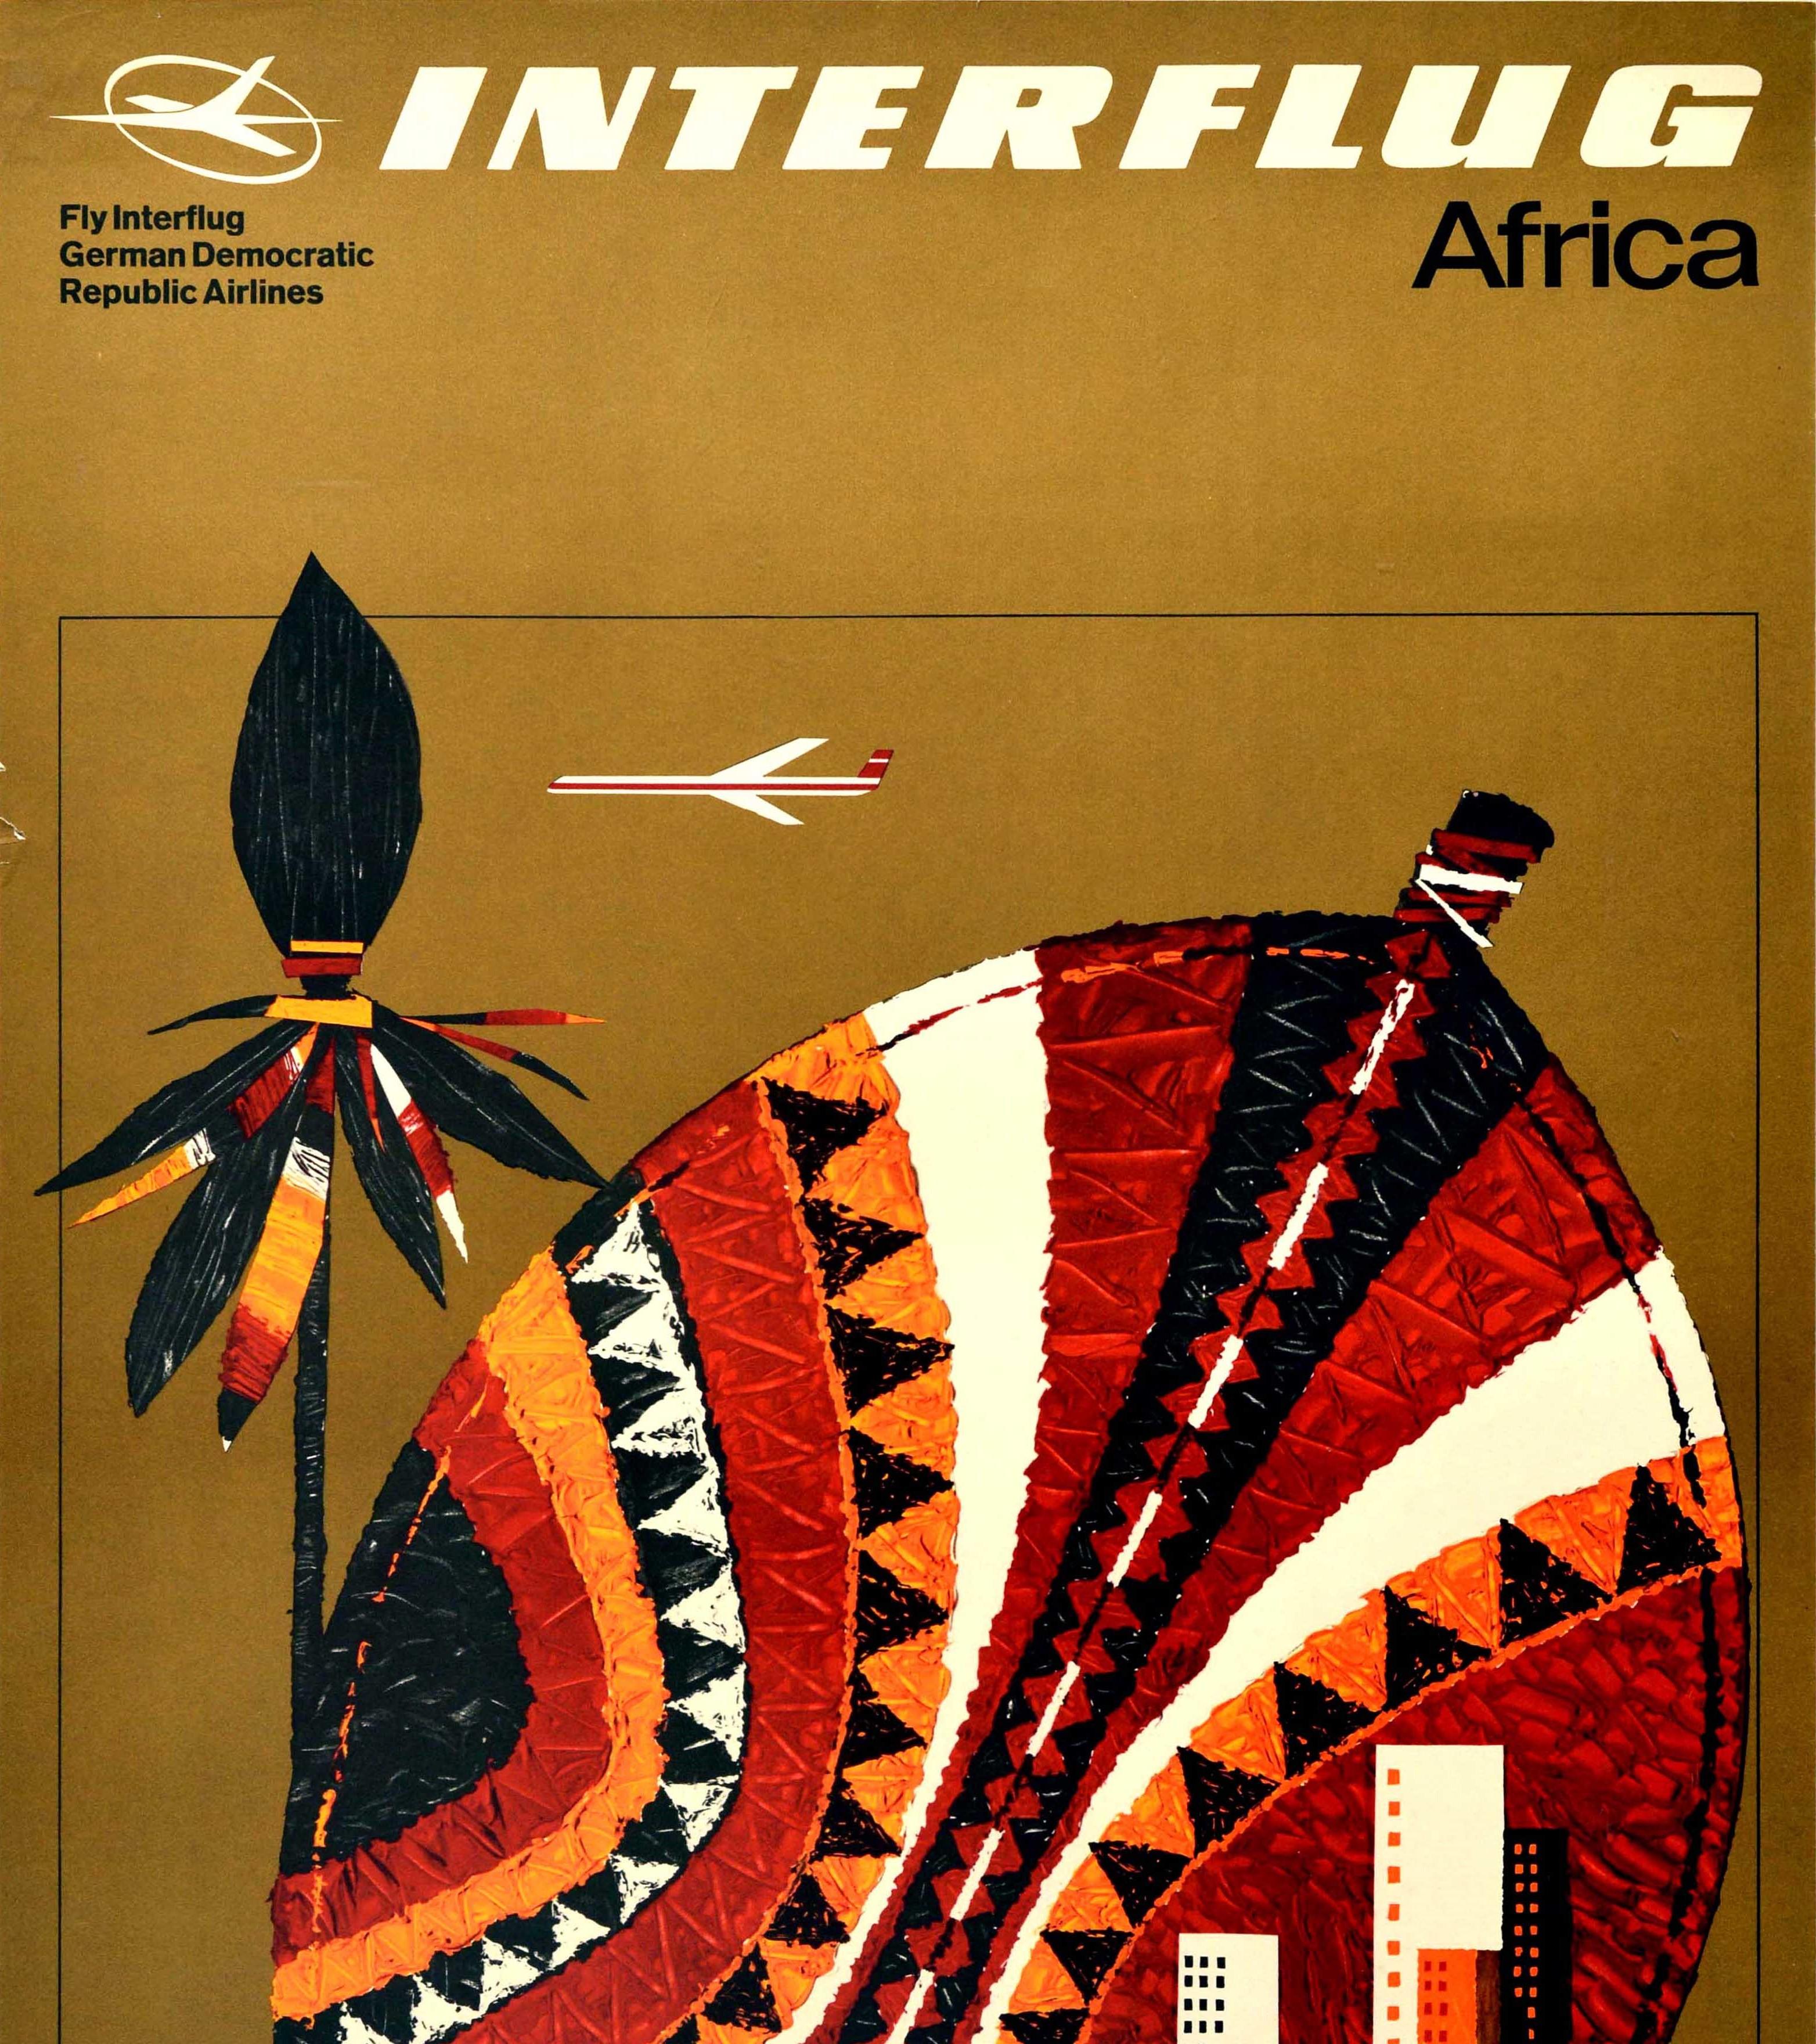 Original vintage aviation advertising poster for Interflug Africa - Fly Interflug German Democratic Republic Airlines - featuring a stylised white and red plane flying over a spear and shield decorated in a traditional colourful pattern with an